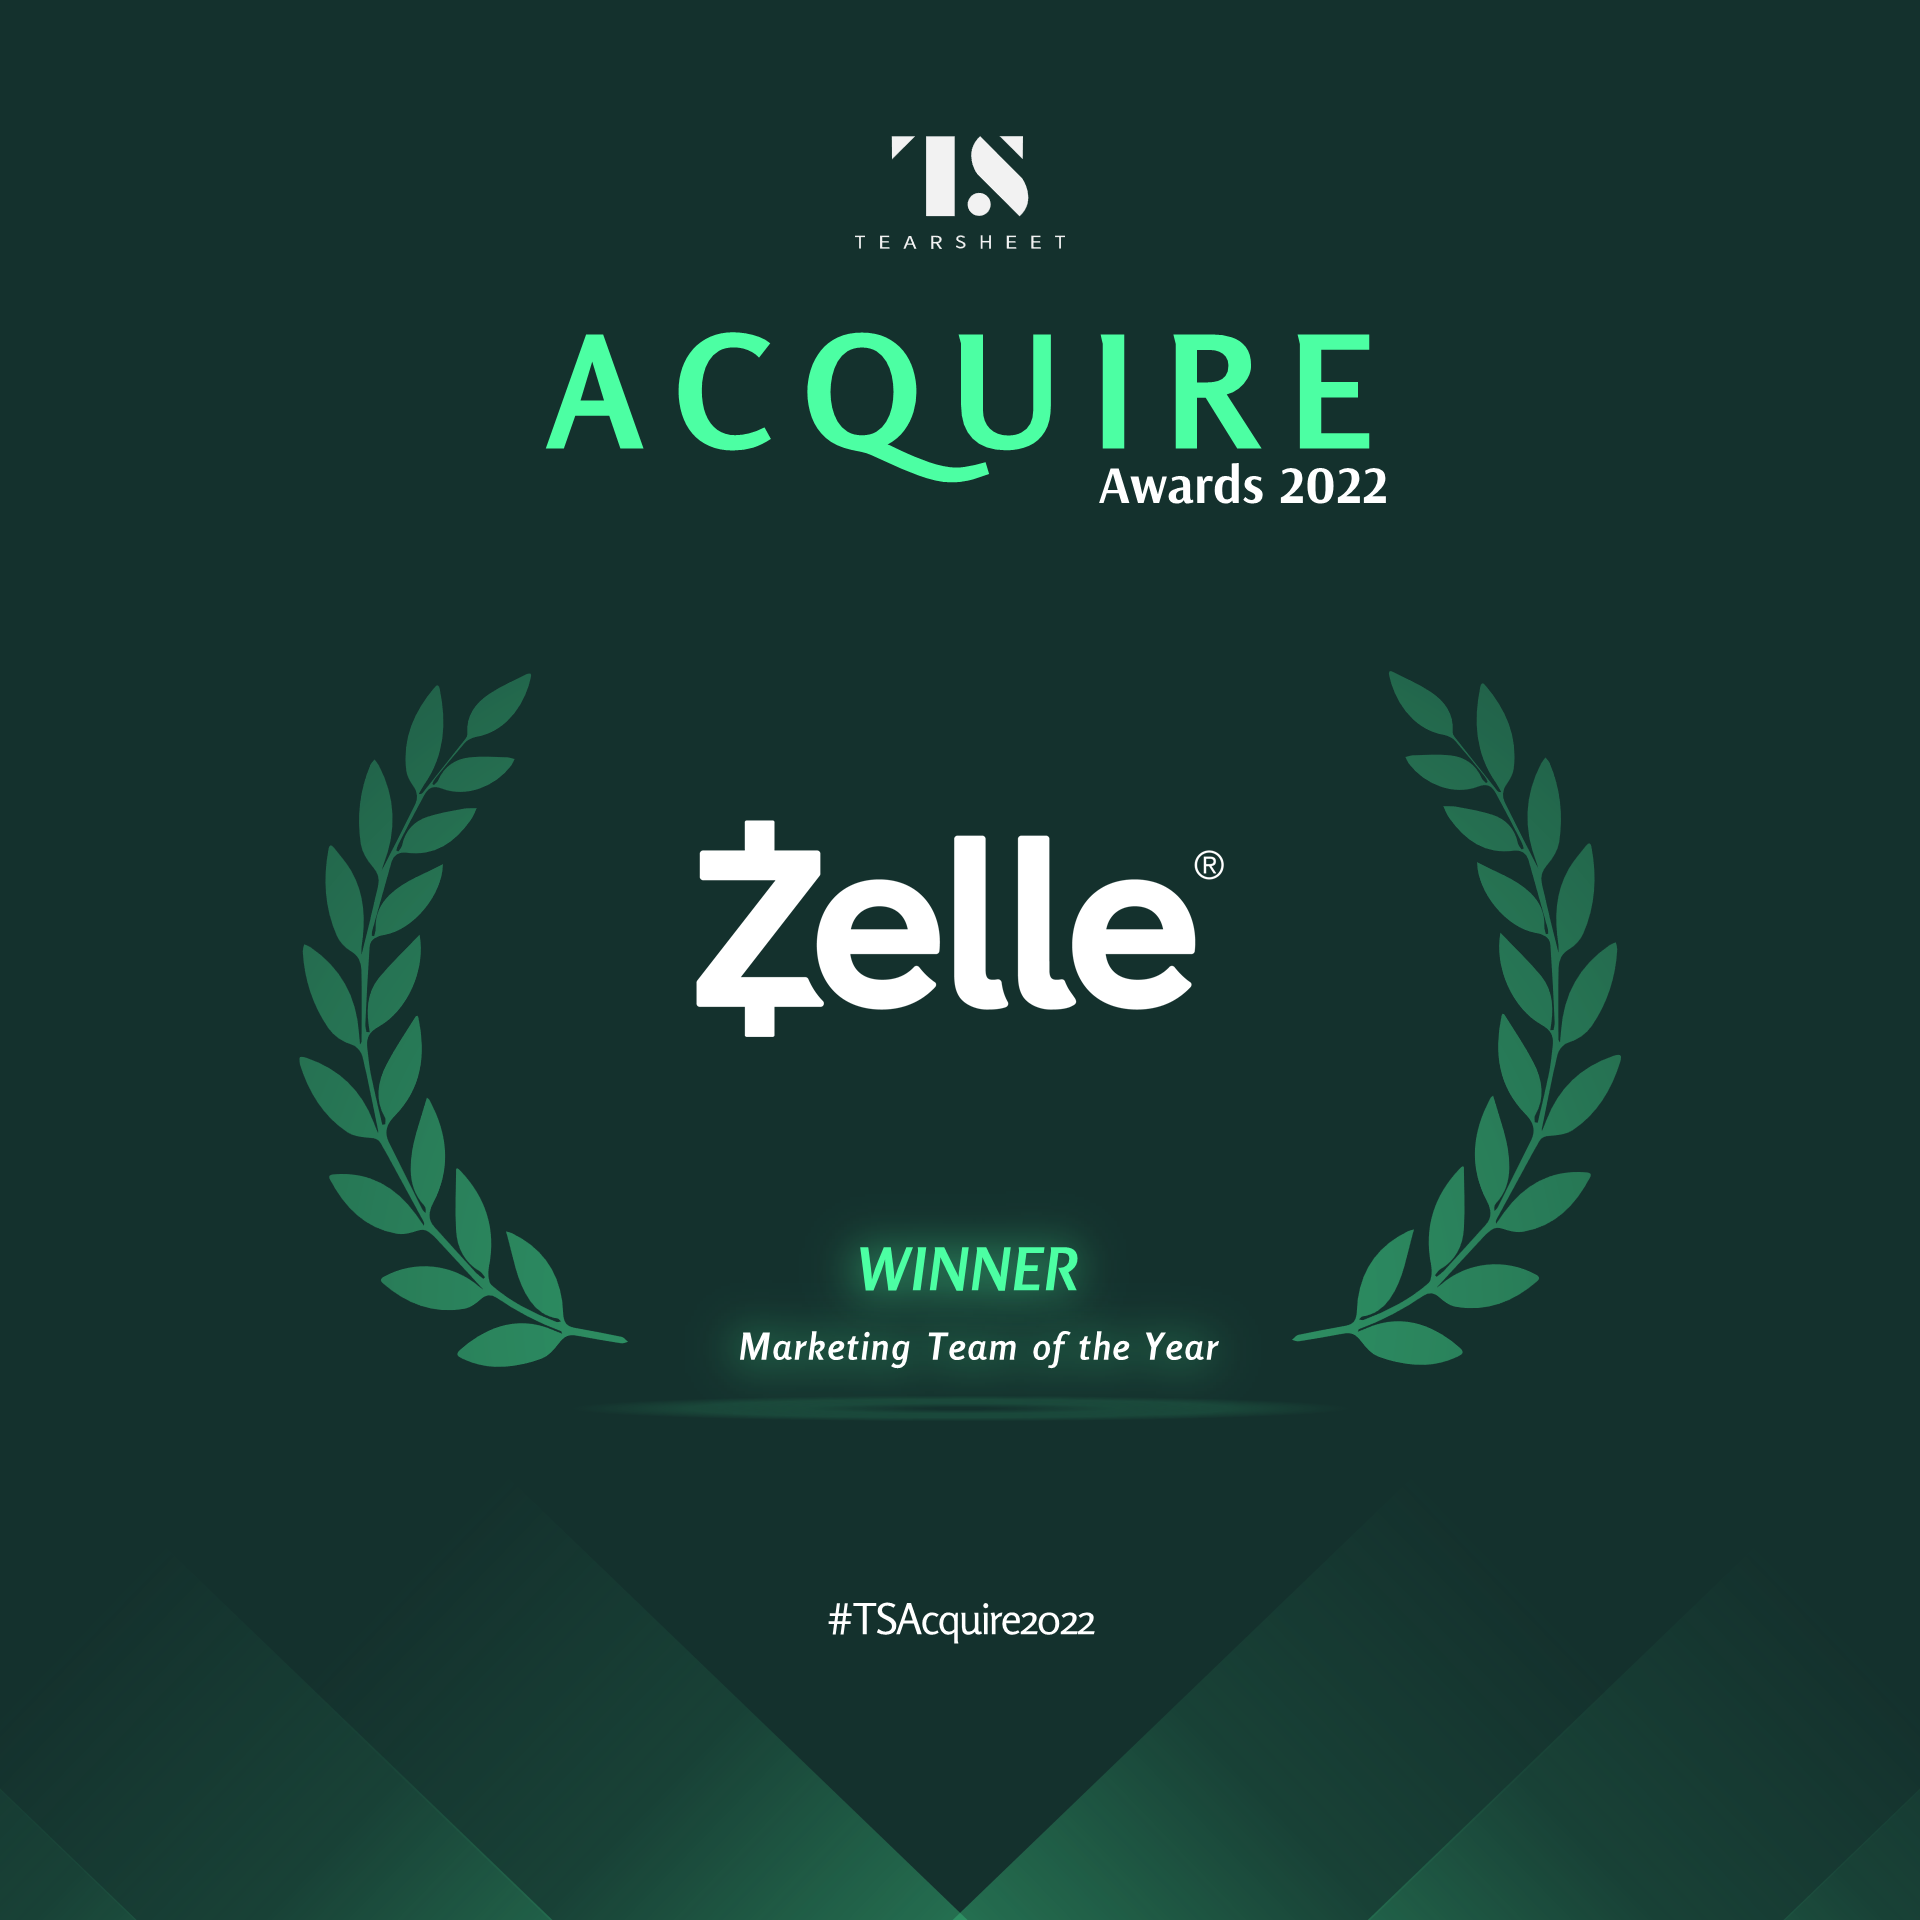 Acquire Awards 2022: Marketing Team of the Year